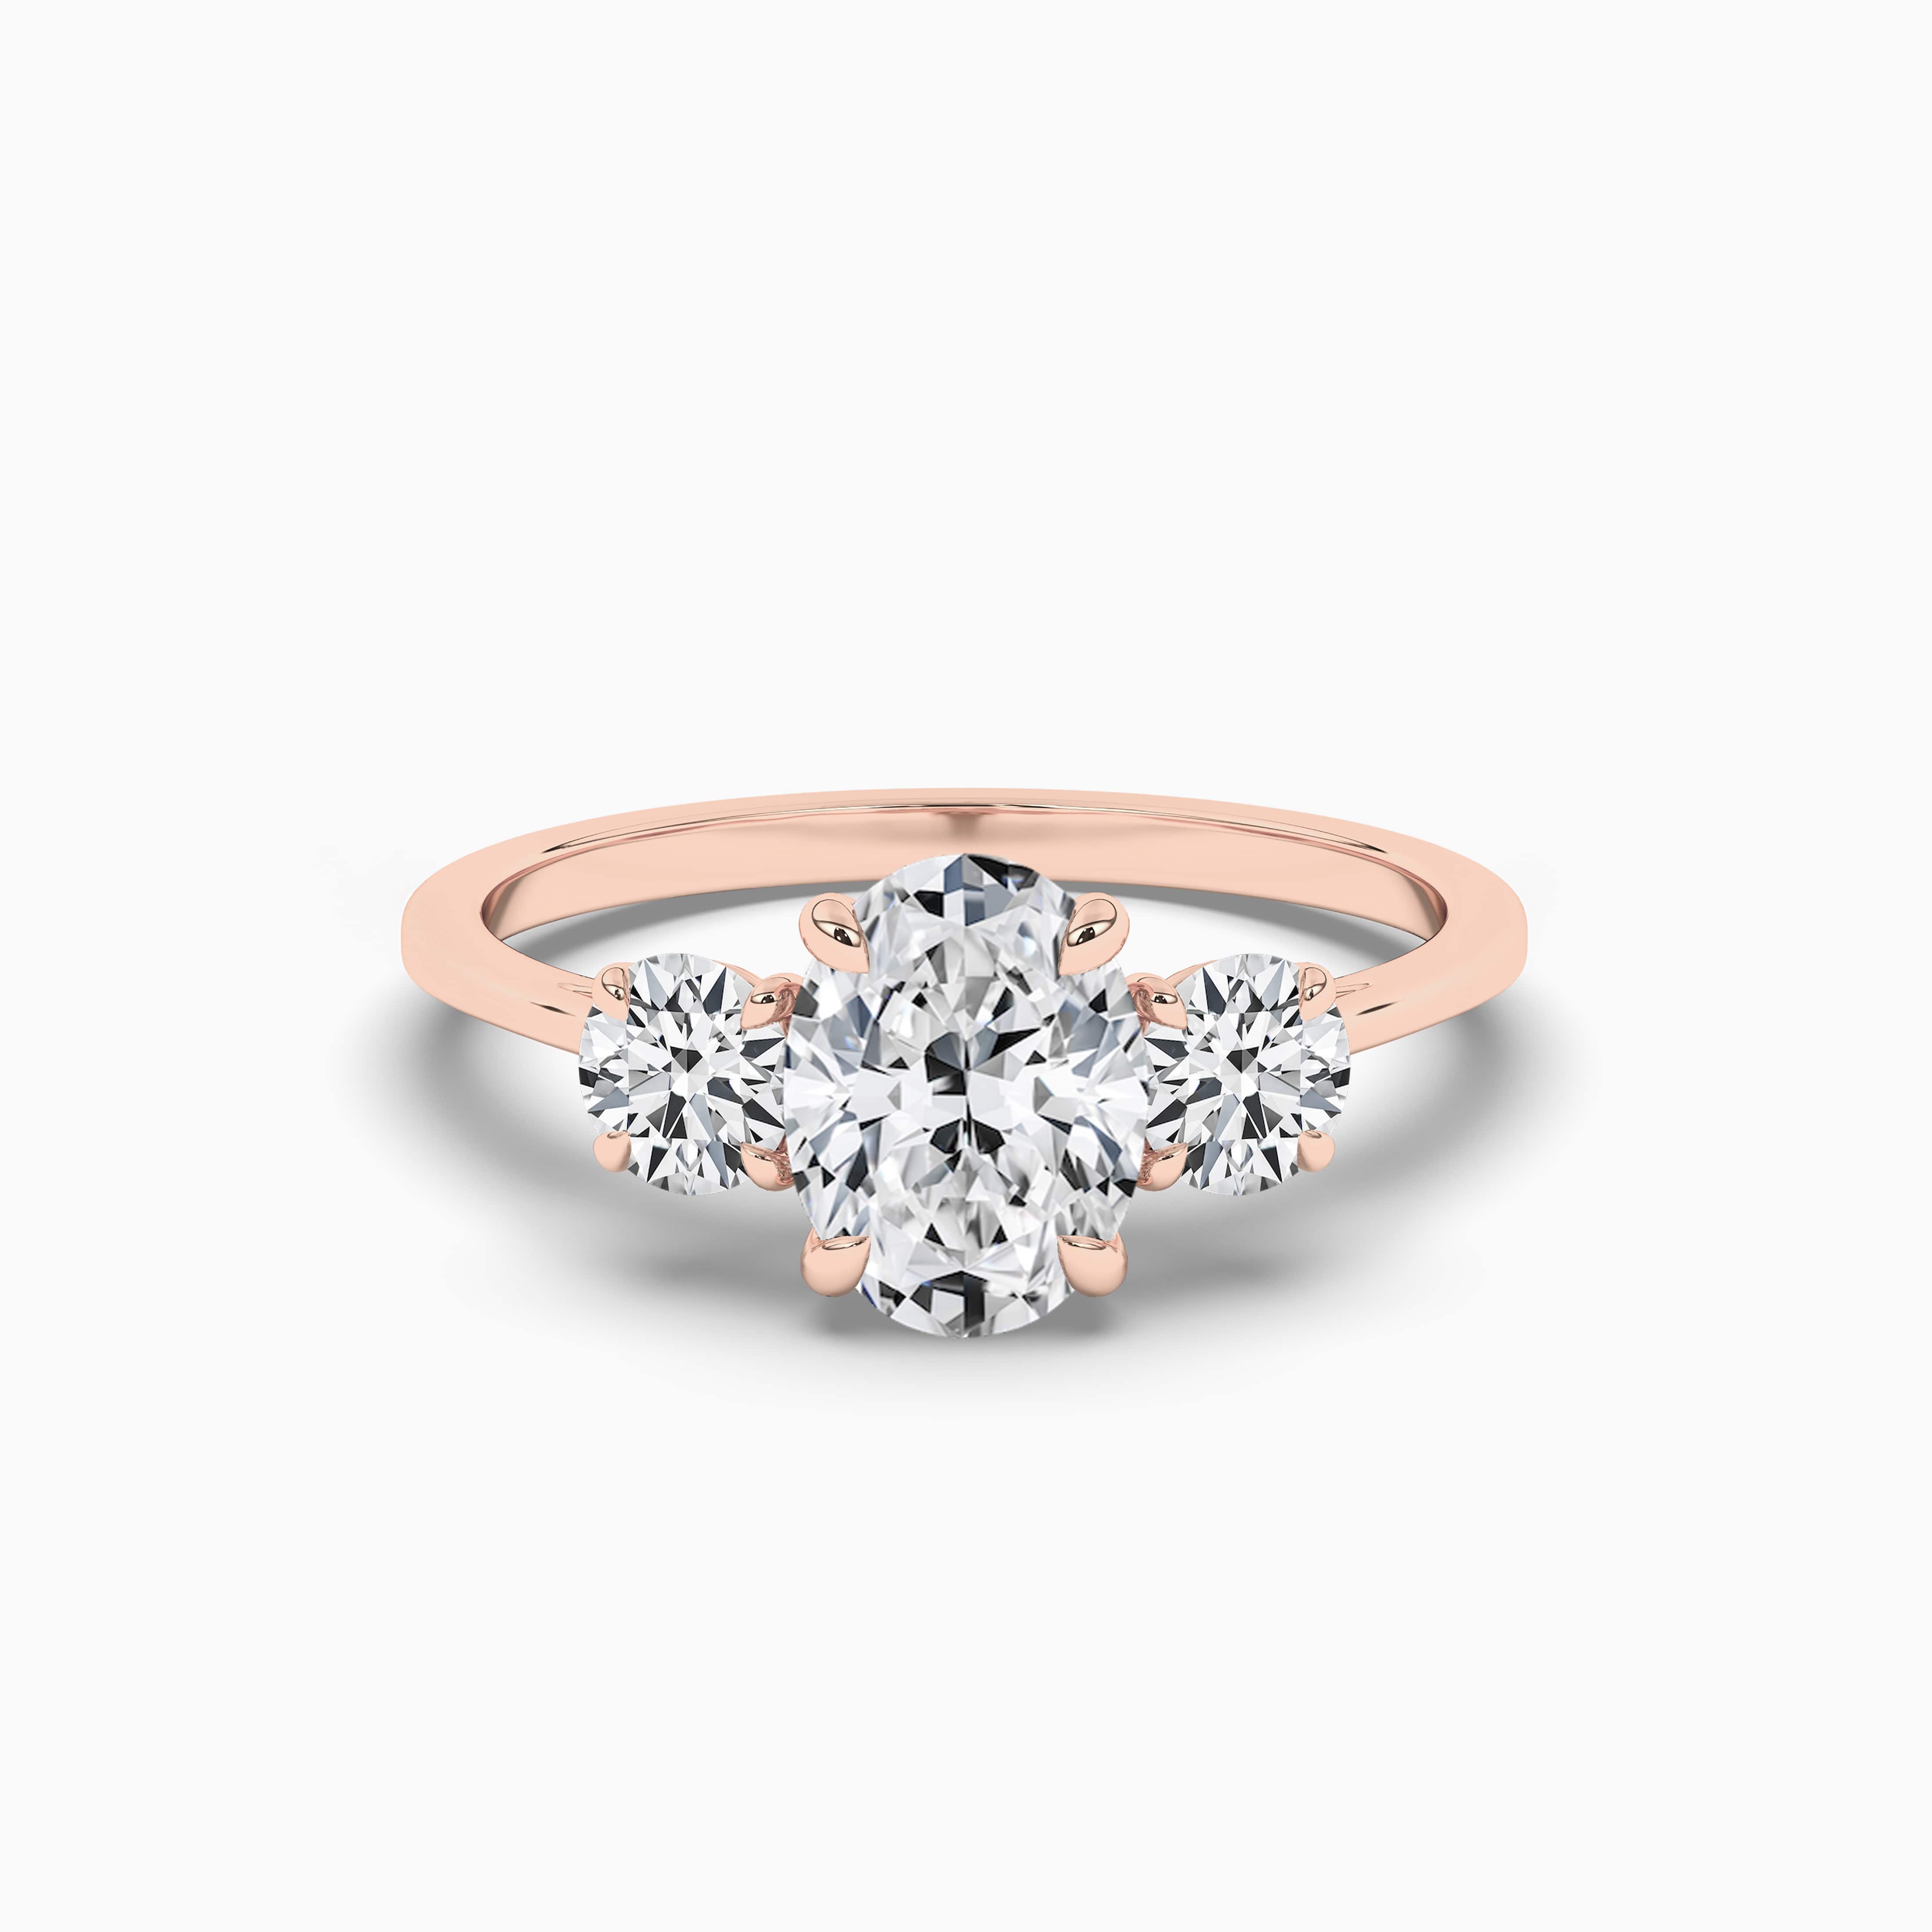 OVAL CUT DIAMOND ENGAGEMENT RING WITH A THREE STONE IN ROSE GOLD